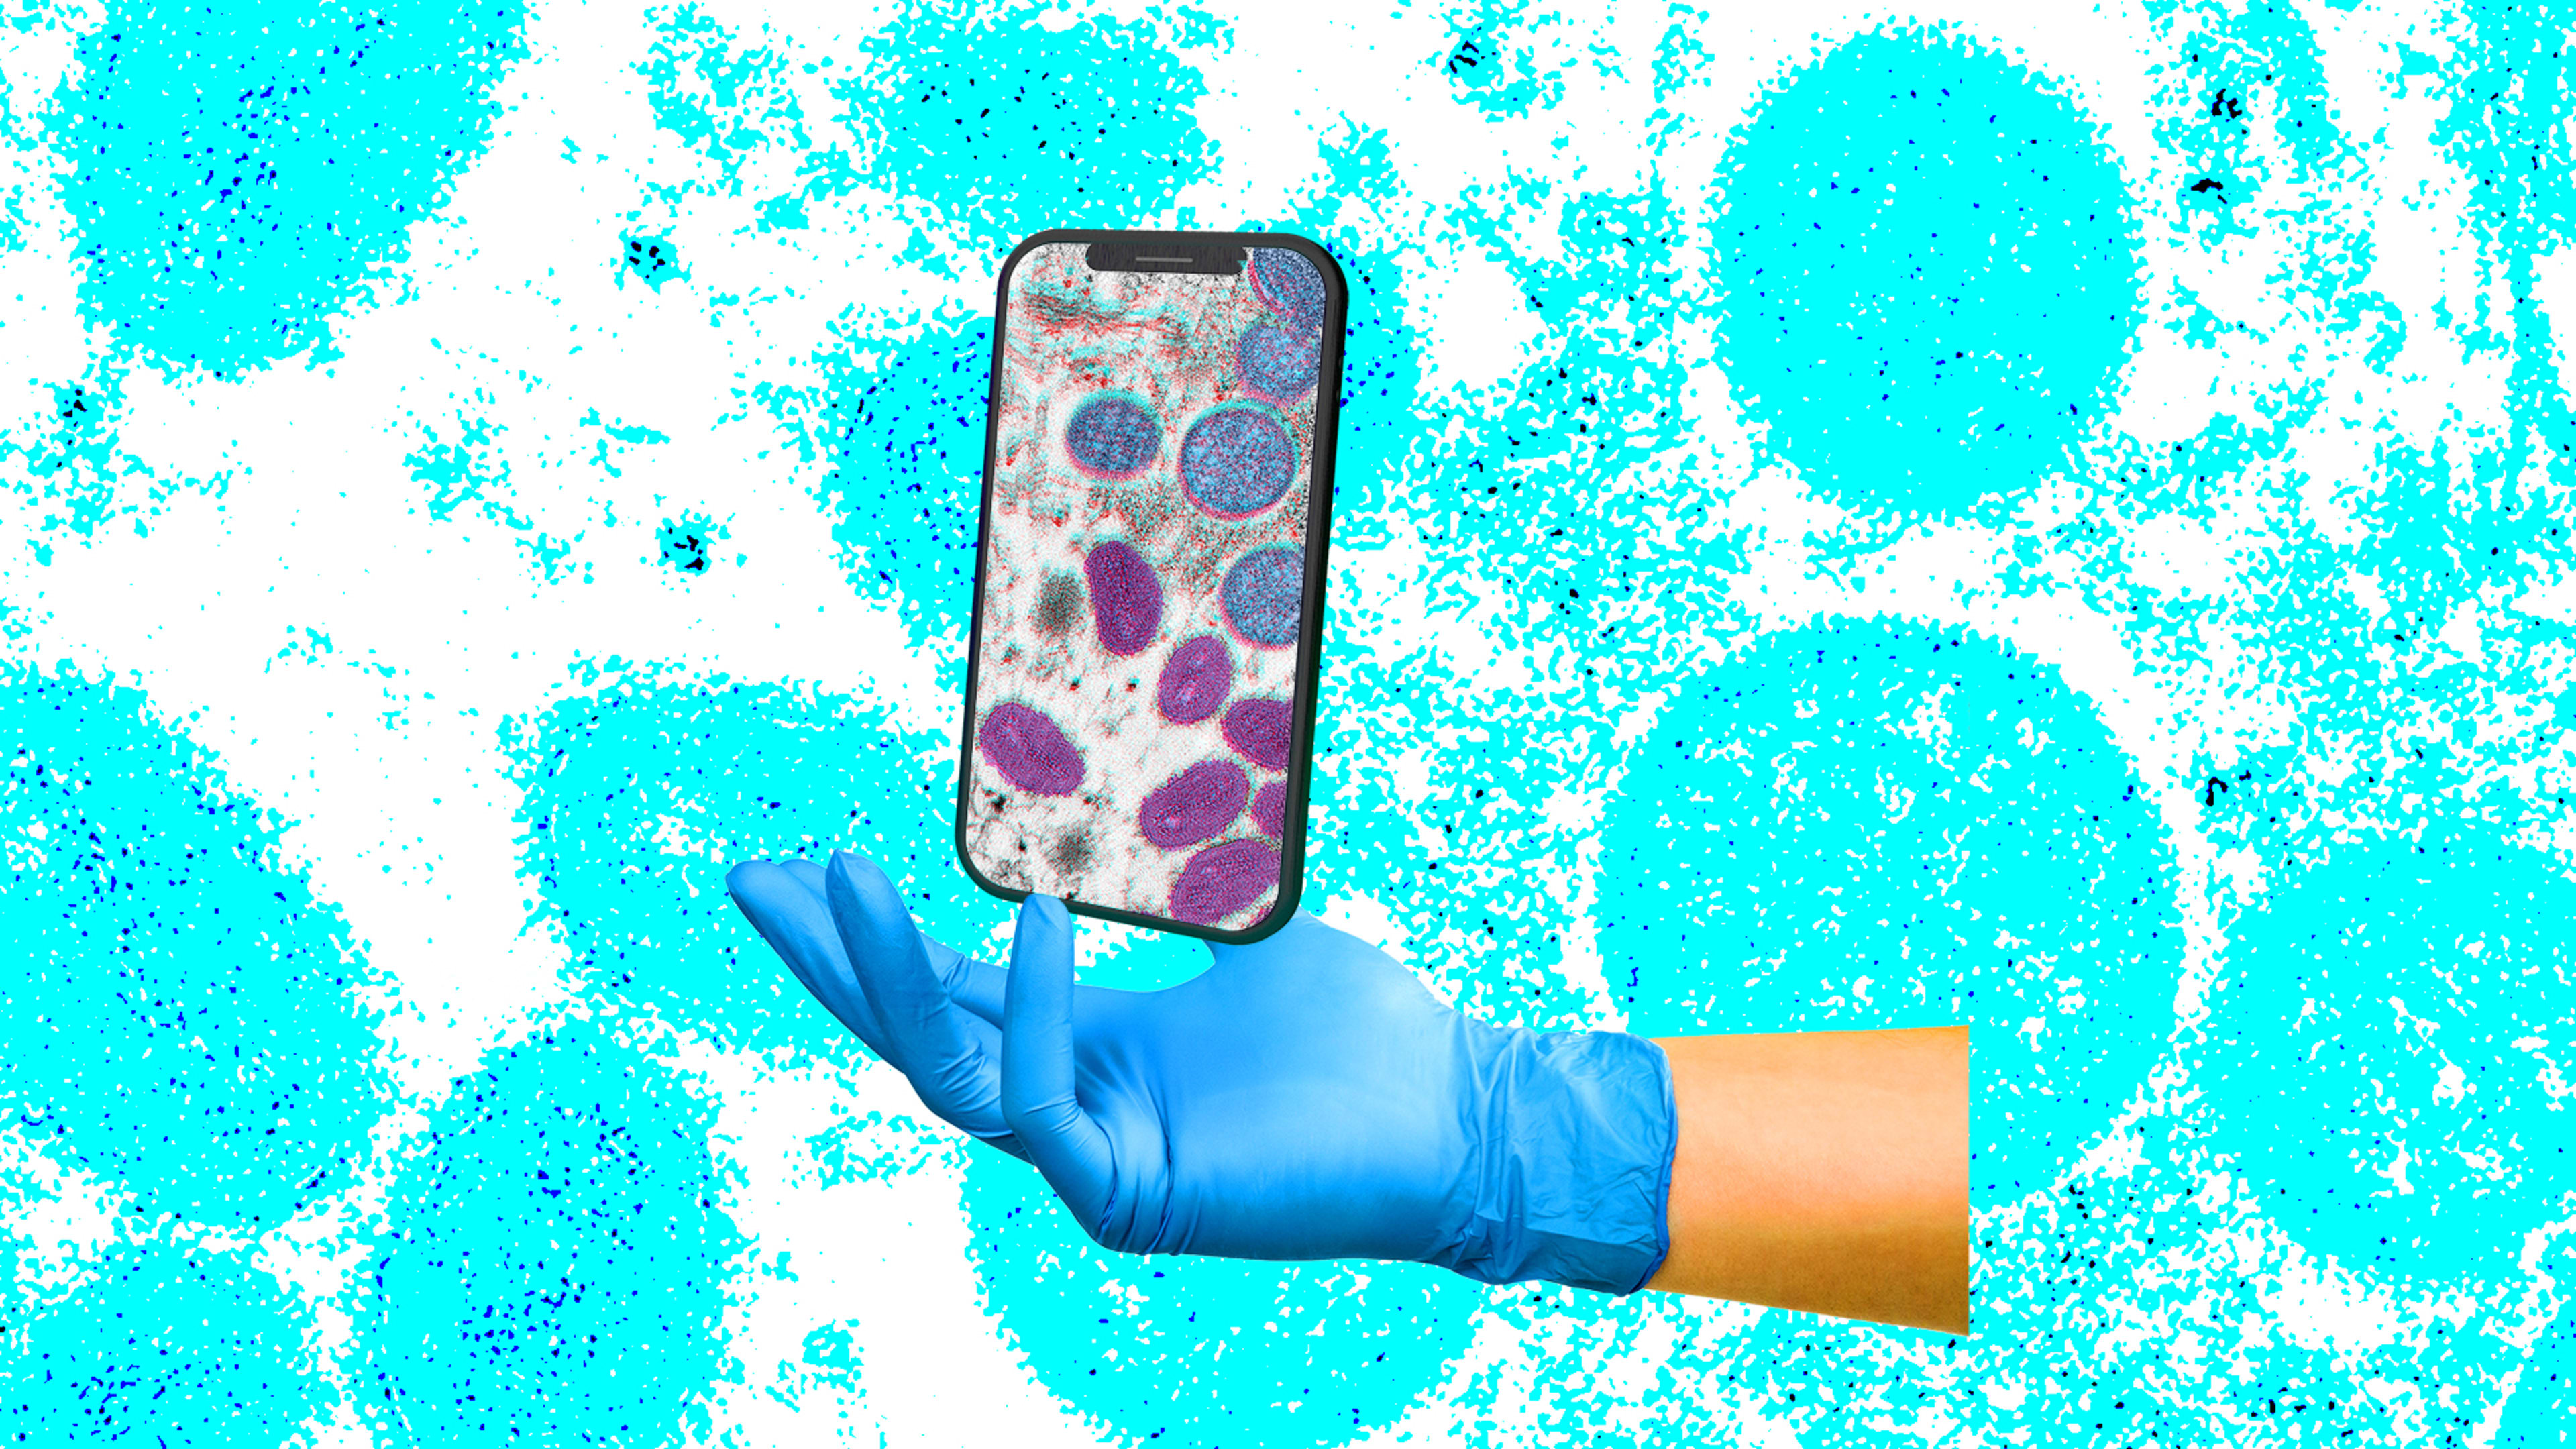 Doctors are taking to TikTok to offer guidance on monkeypox—and to dispel harmful myths